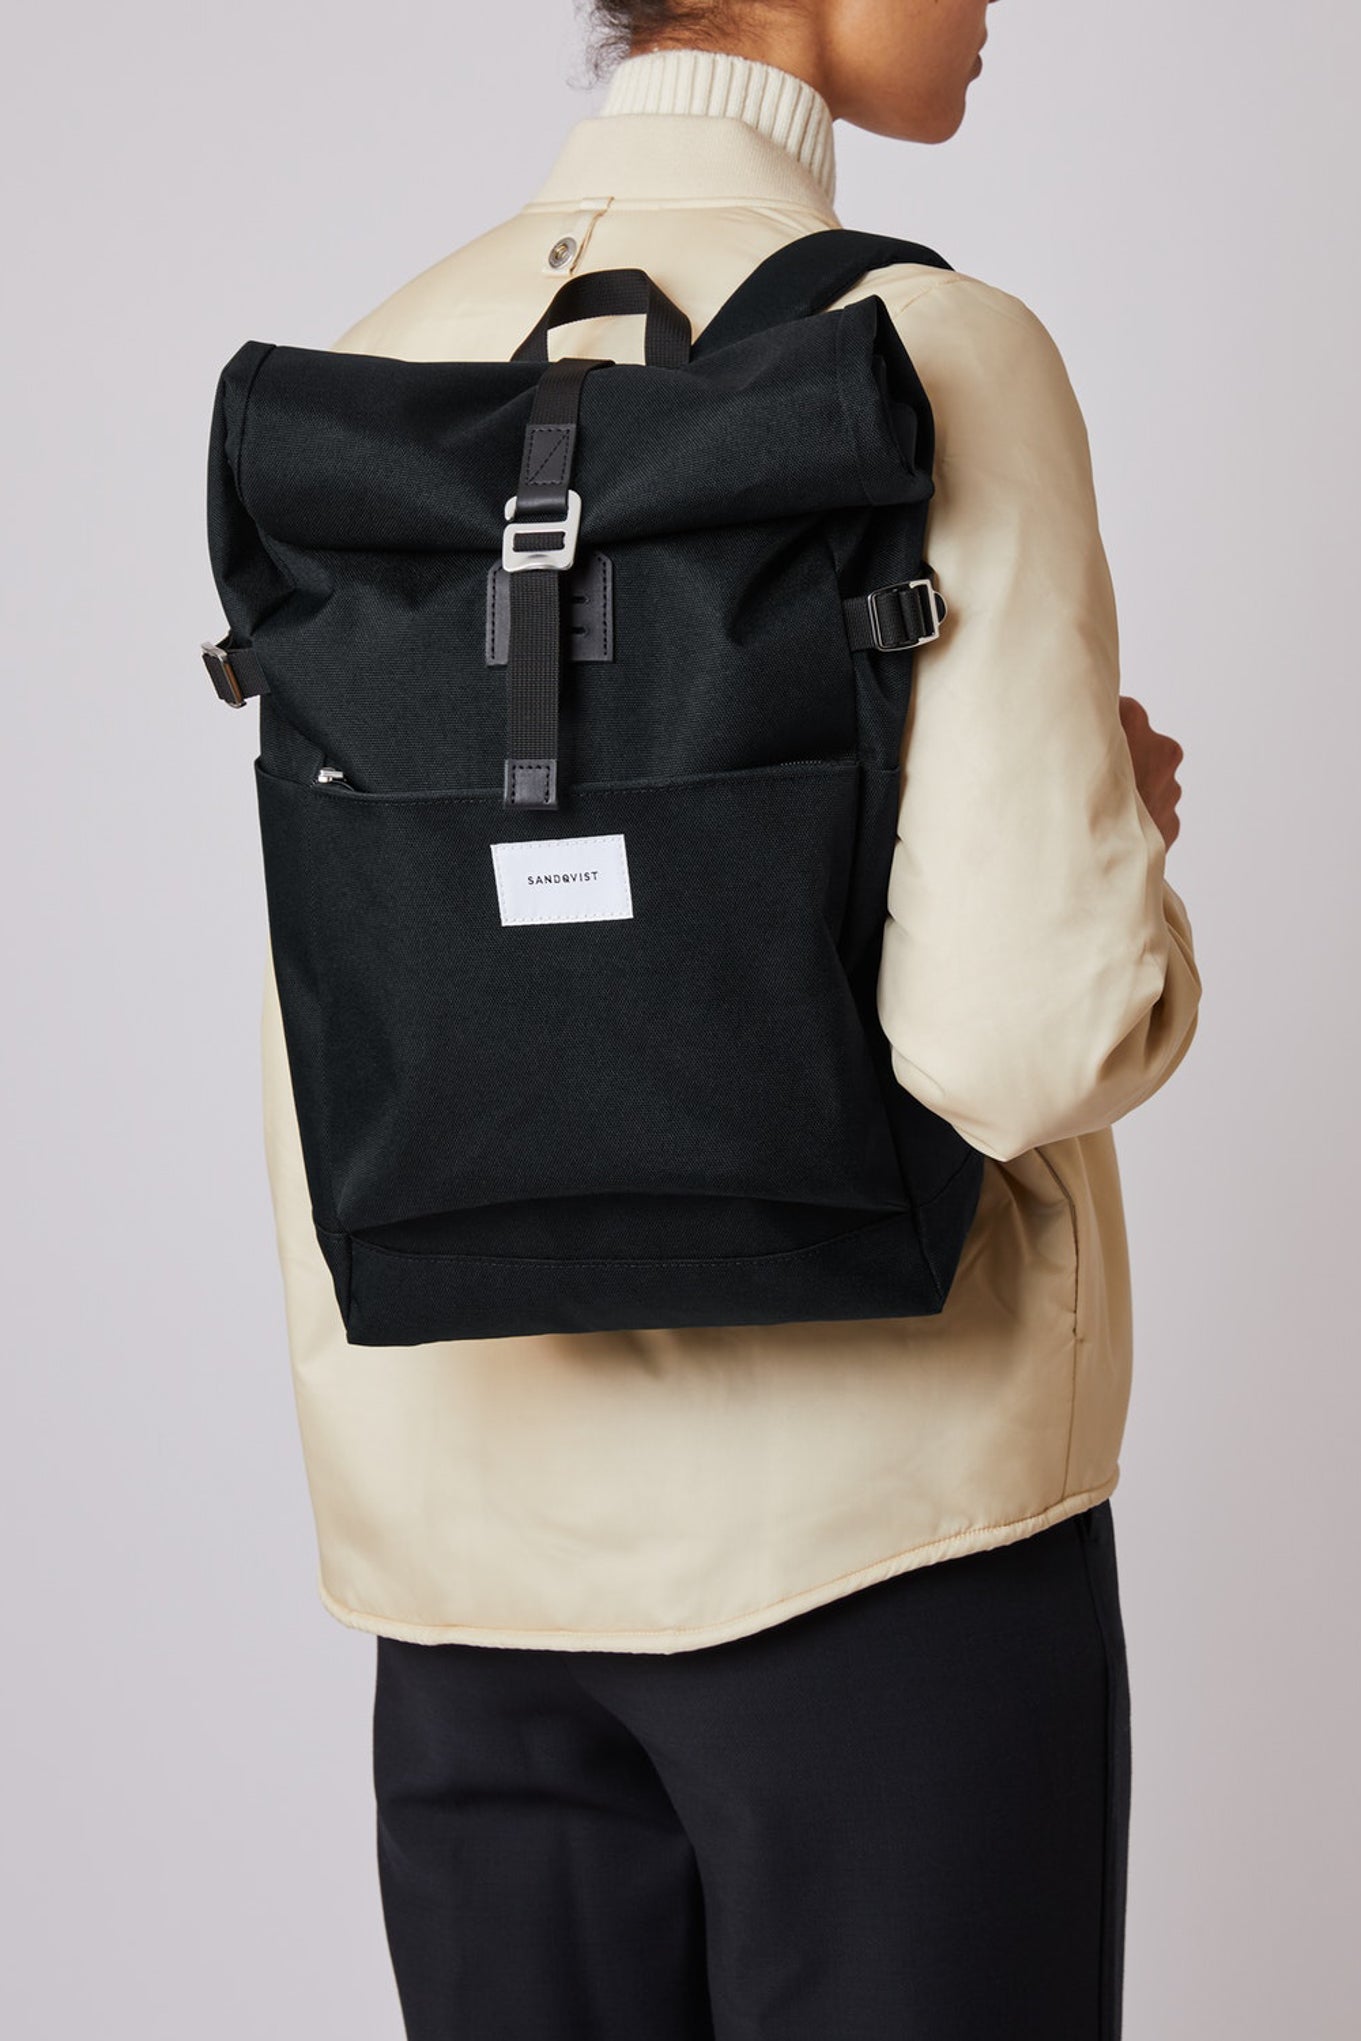 ILON Backpack black with black leather